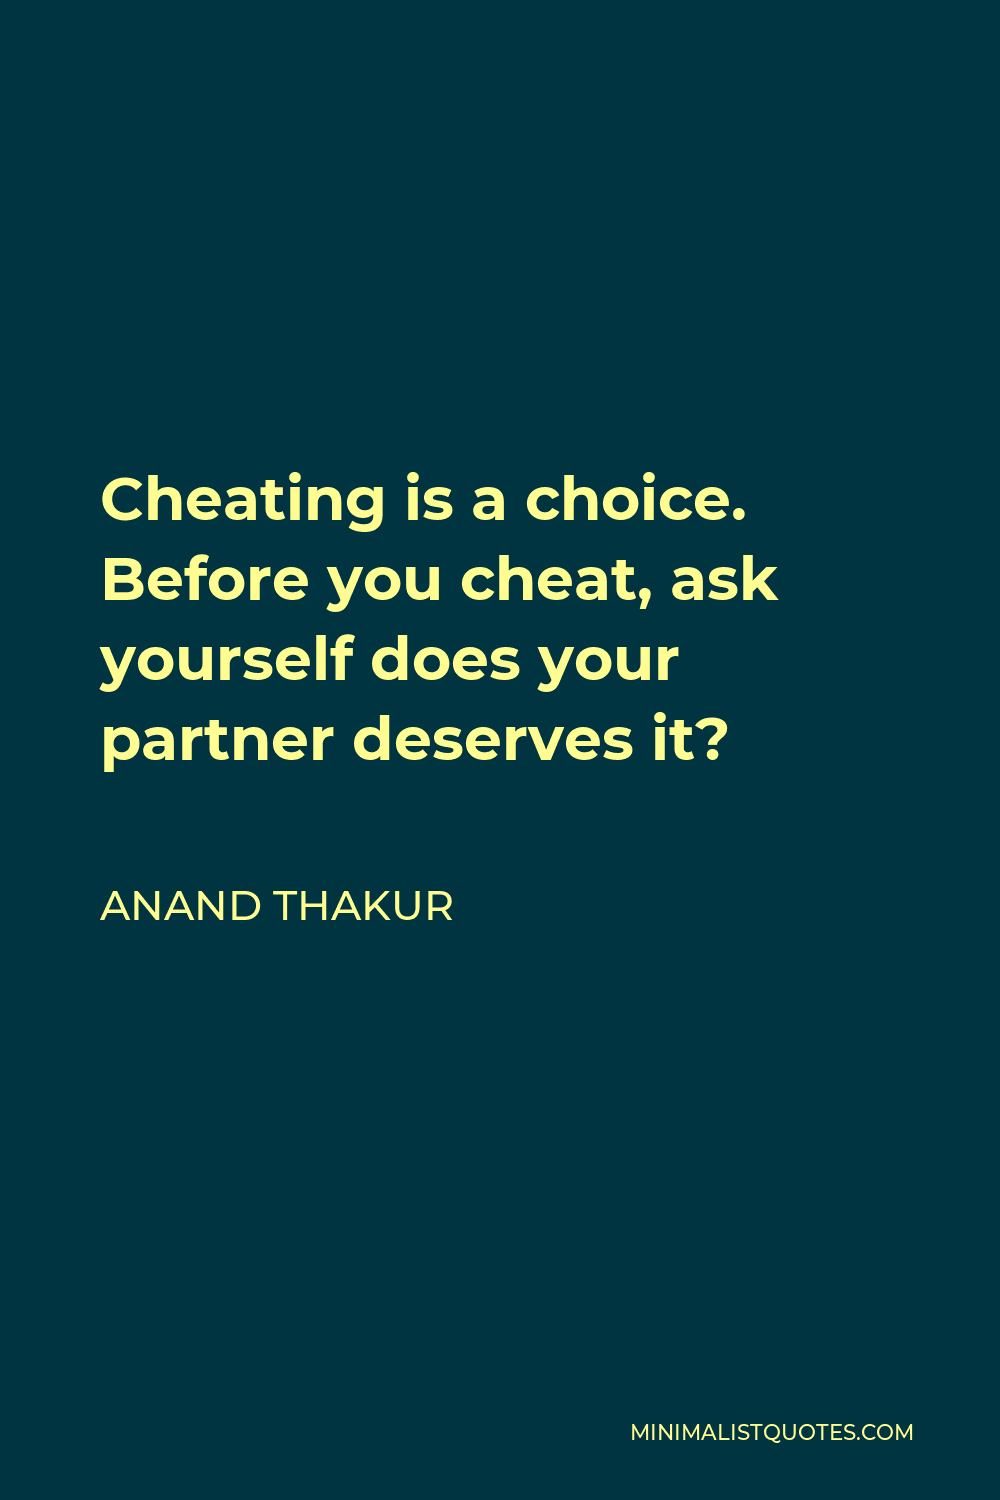 Anand Thakur Quote: Cheating is a choice. Before you cheat, ask ...